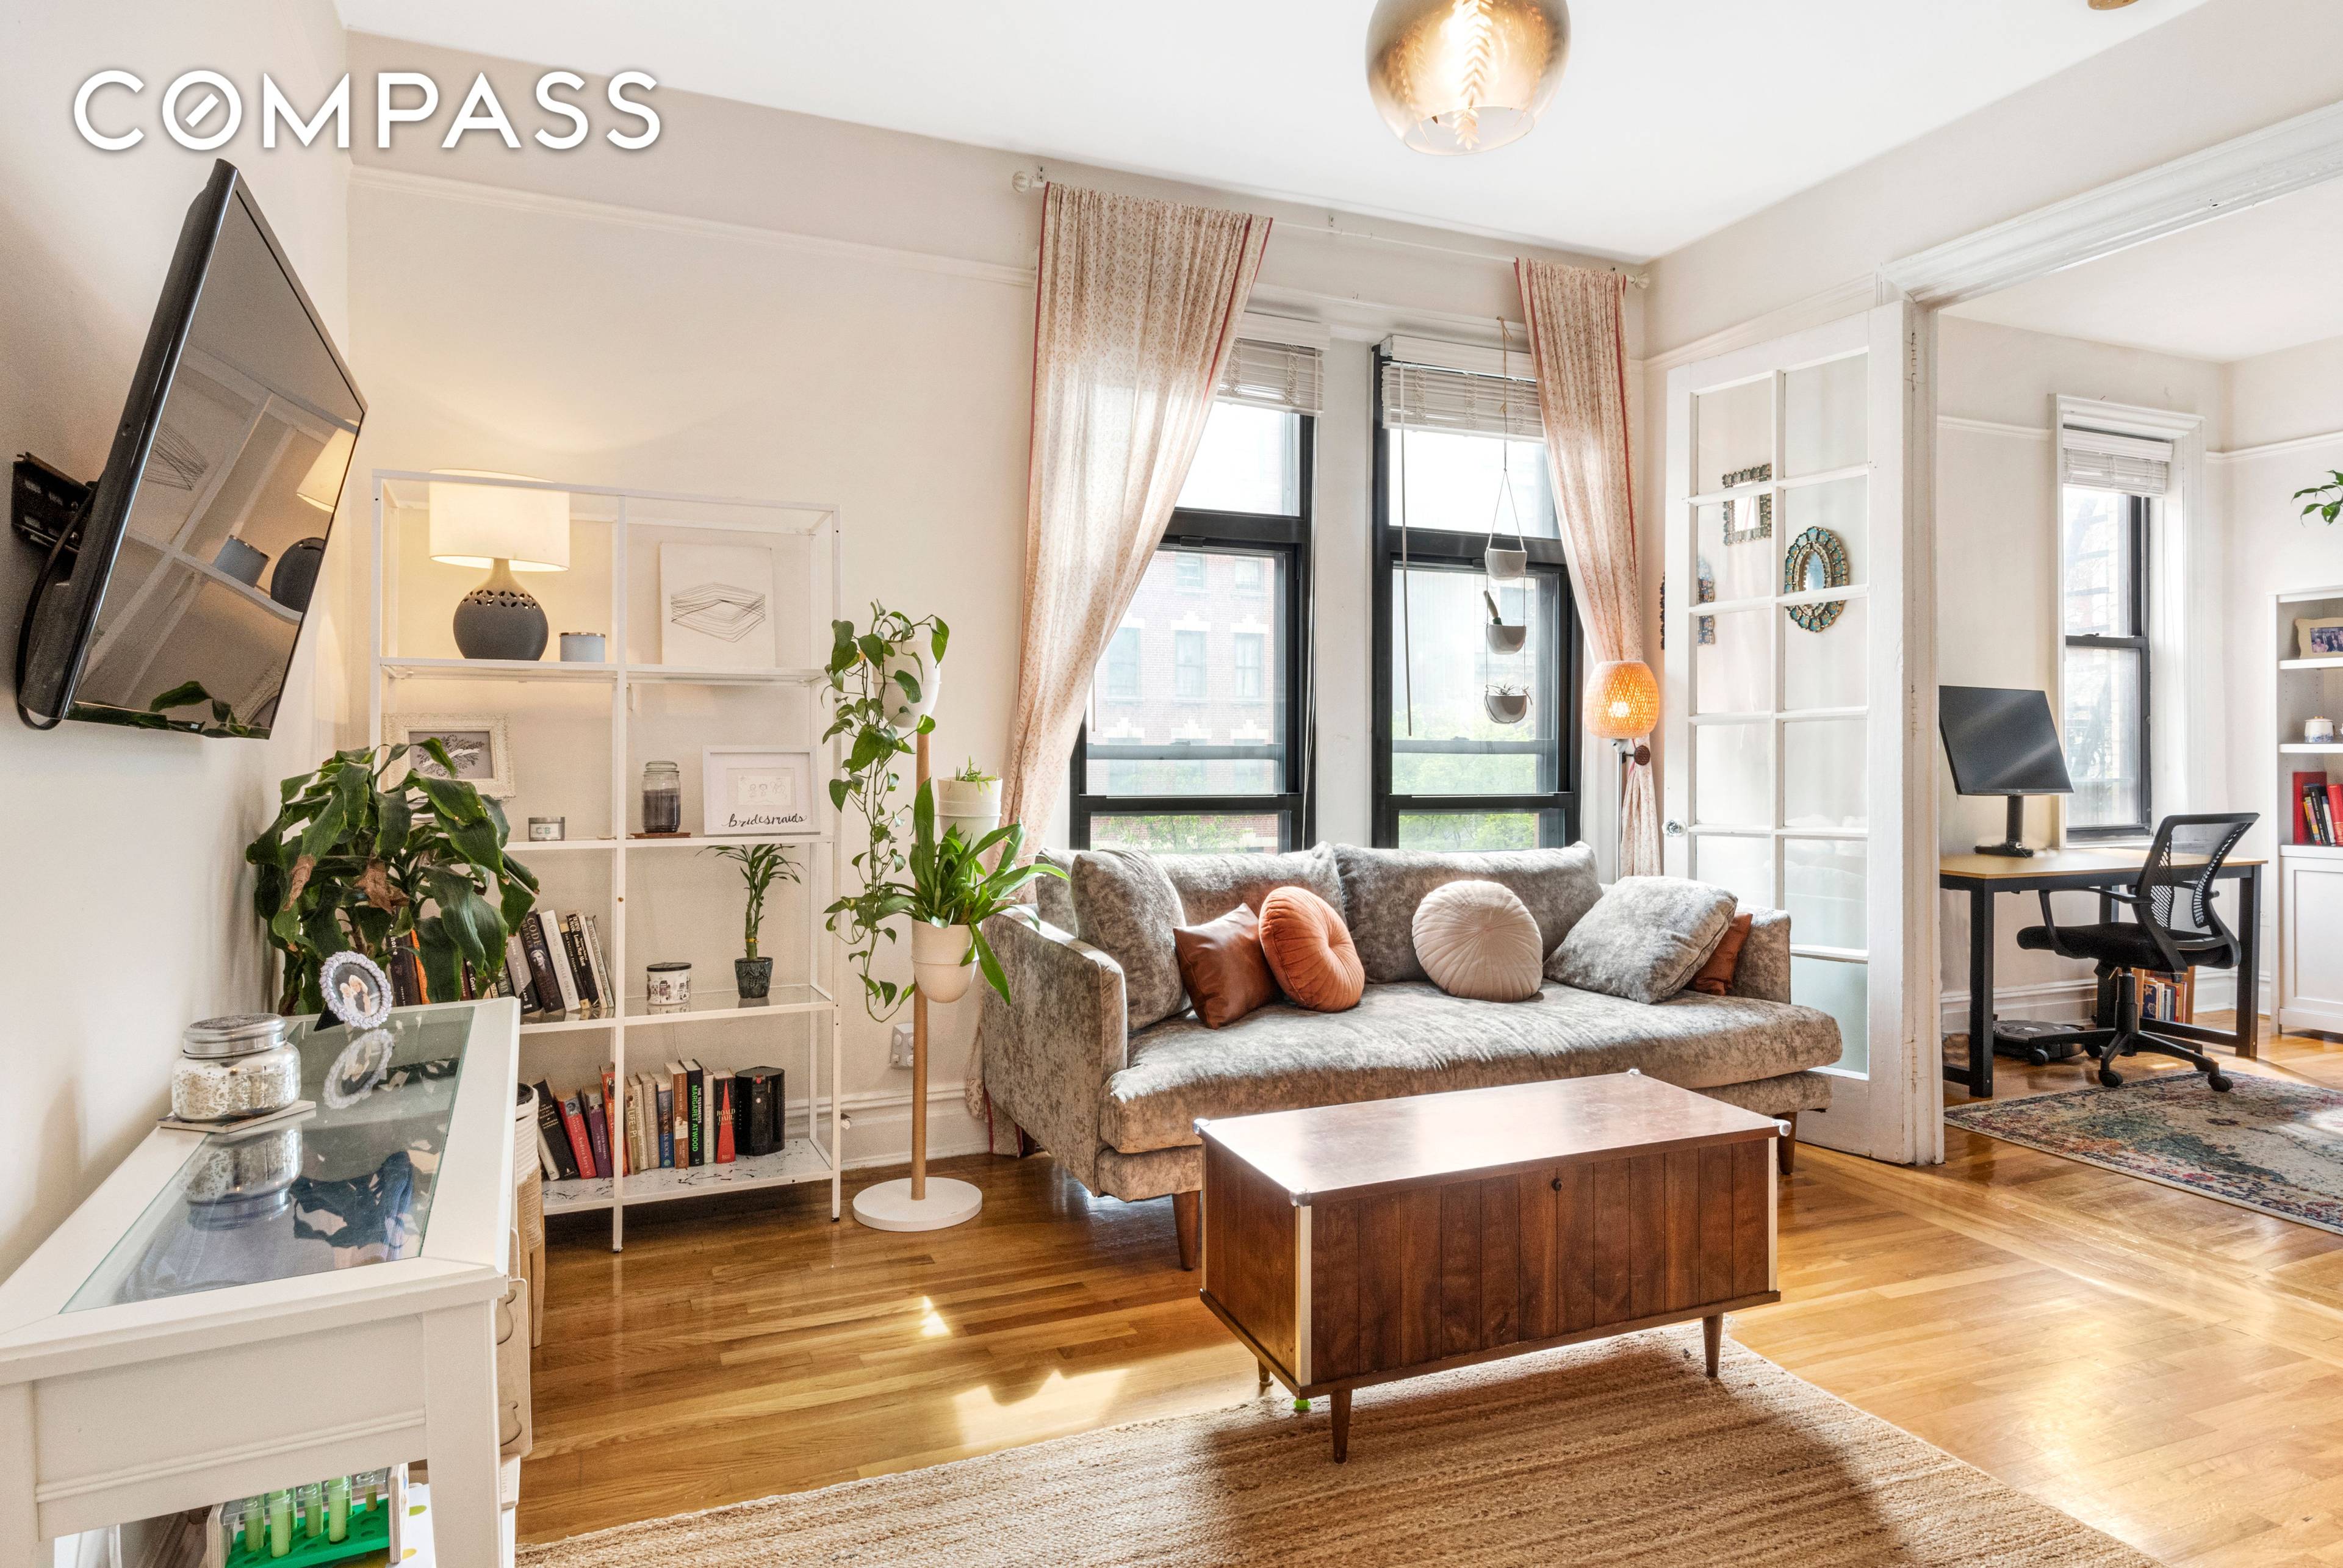 This charming prewar three bedroom or two bedroom home office apartment features oversized windows in the main living spaces and a newly renovated kitchen and bathroom.